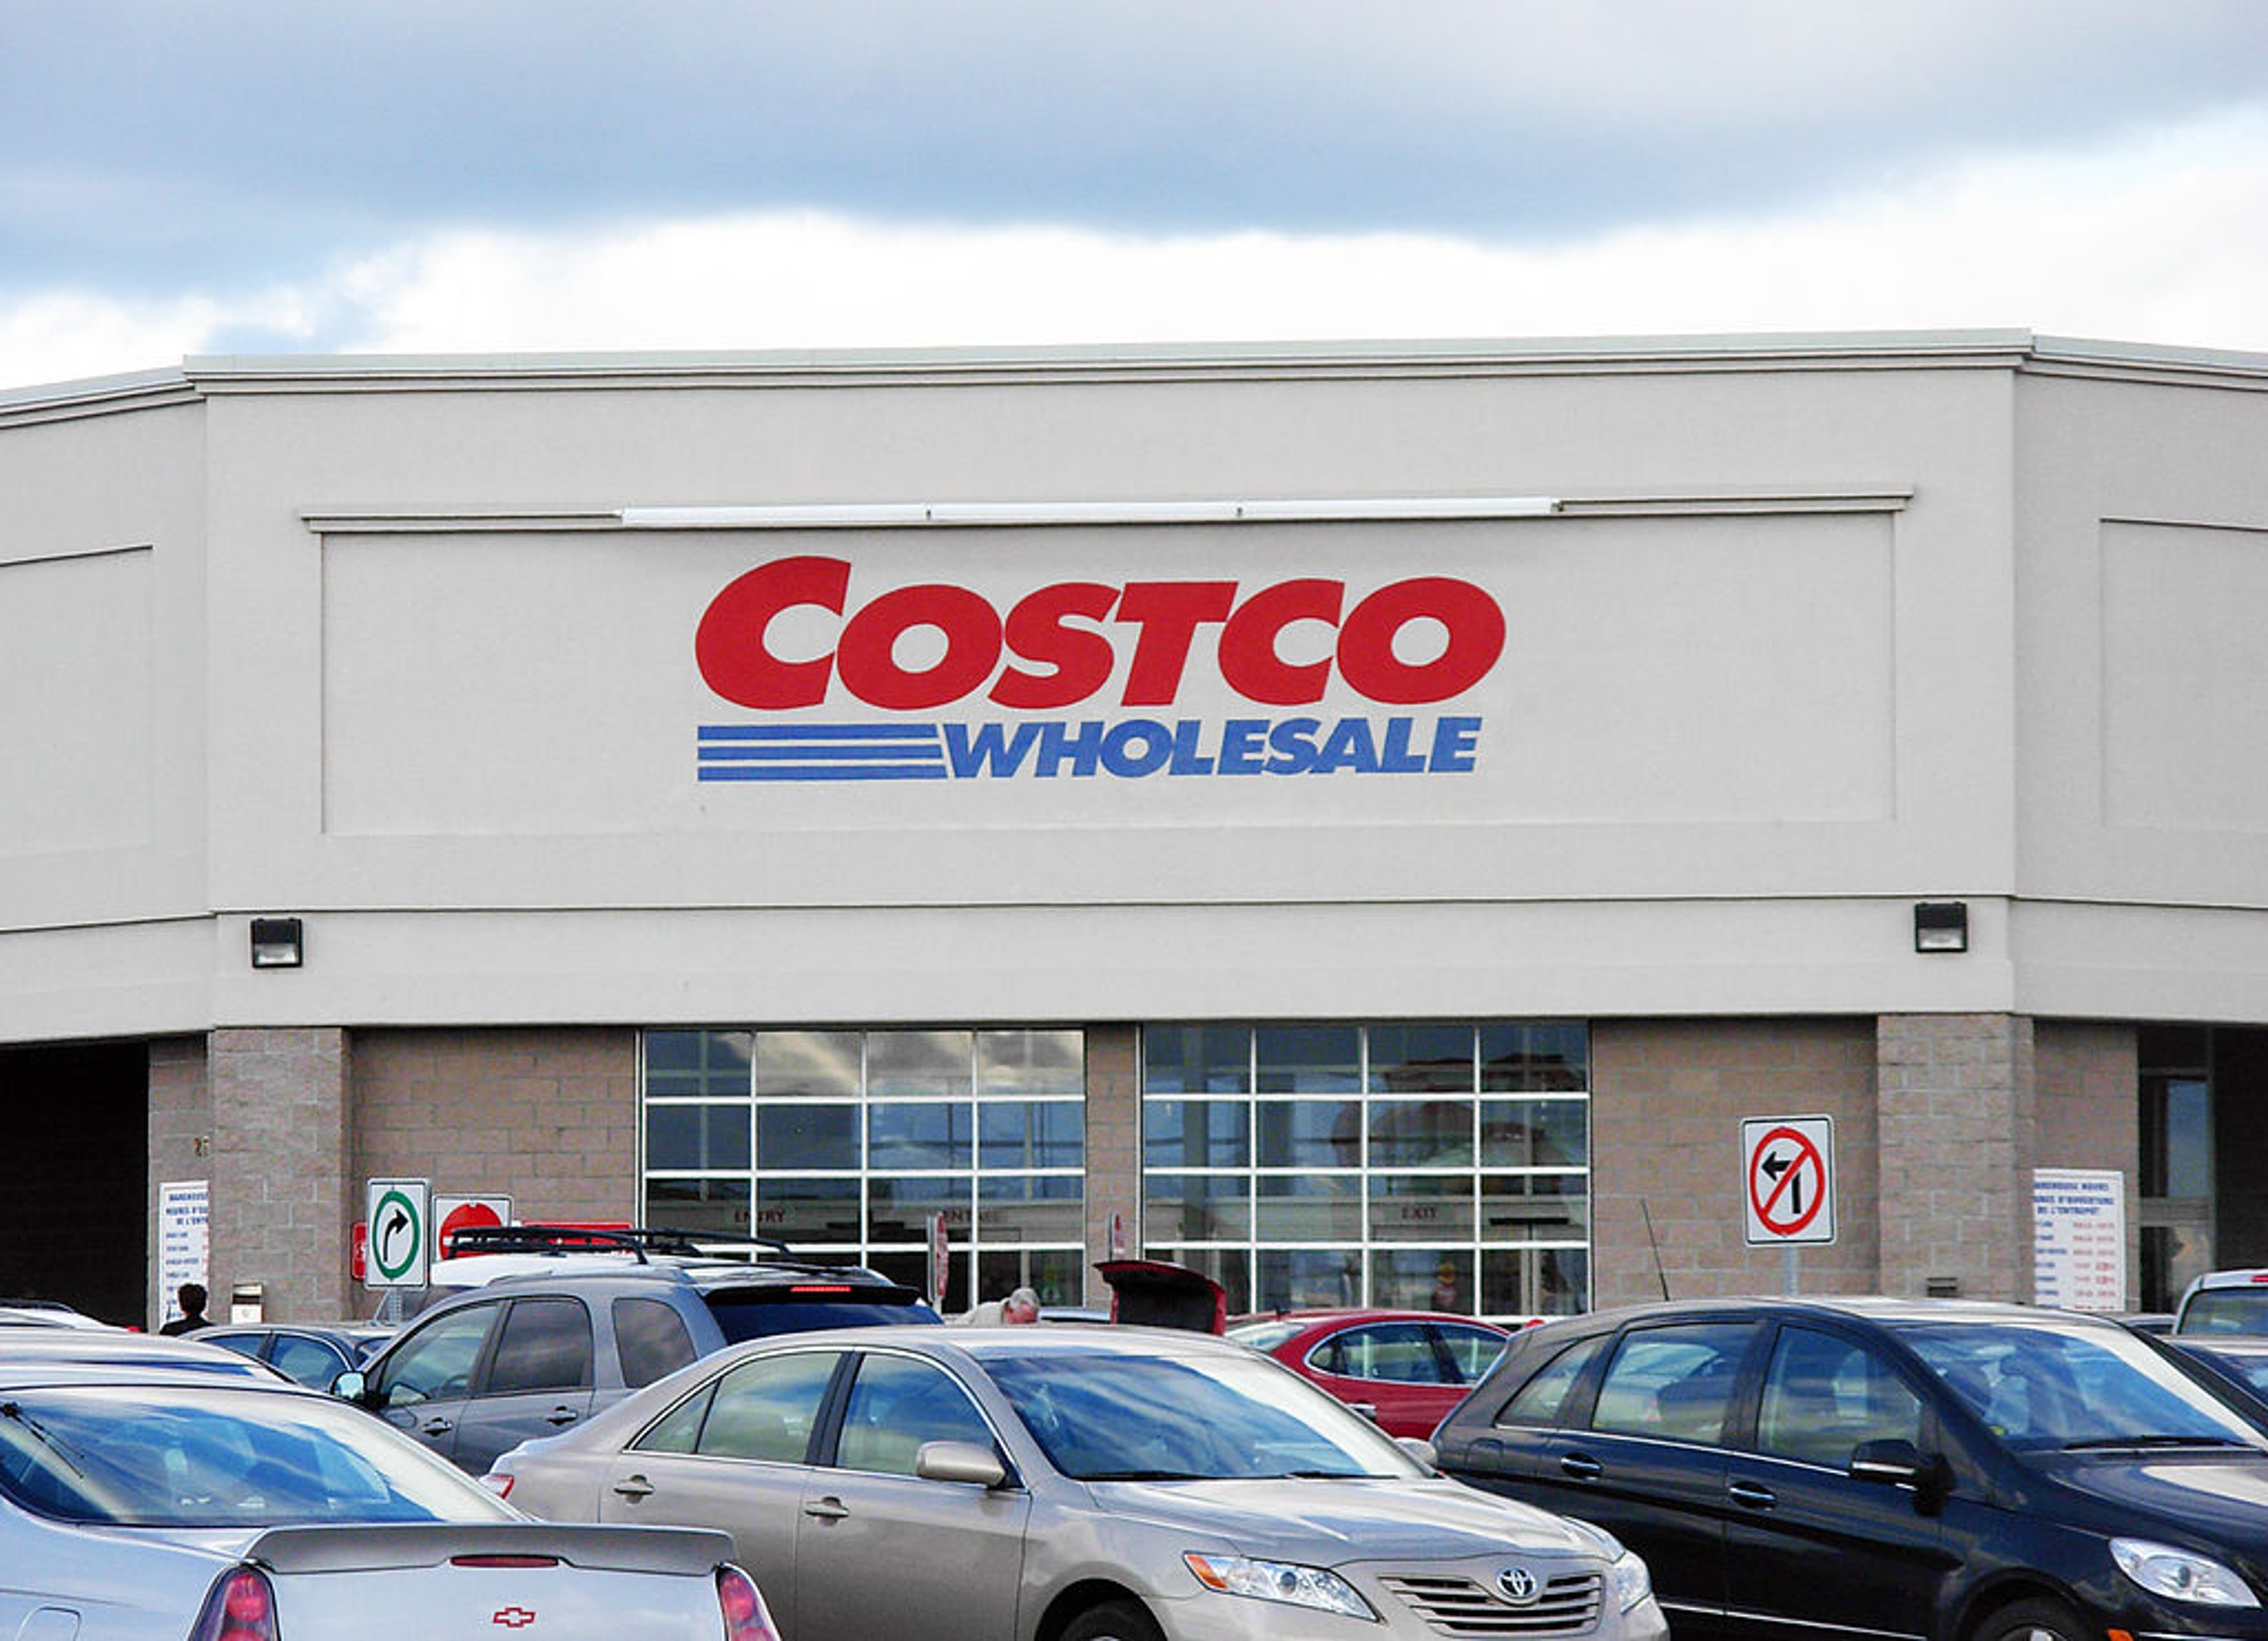 3 Costco Analysts React To Q3 Earnings, Shrinking Margins, Potential Membership Fee Increase